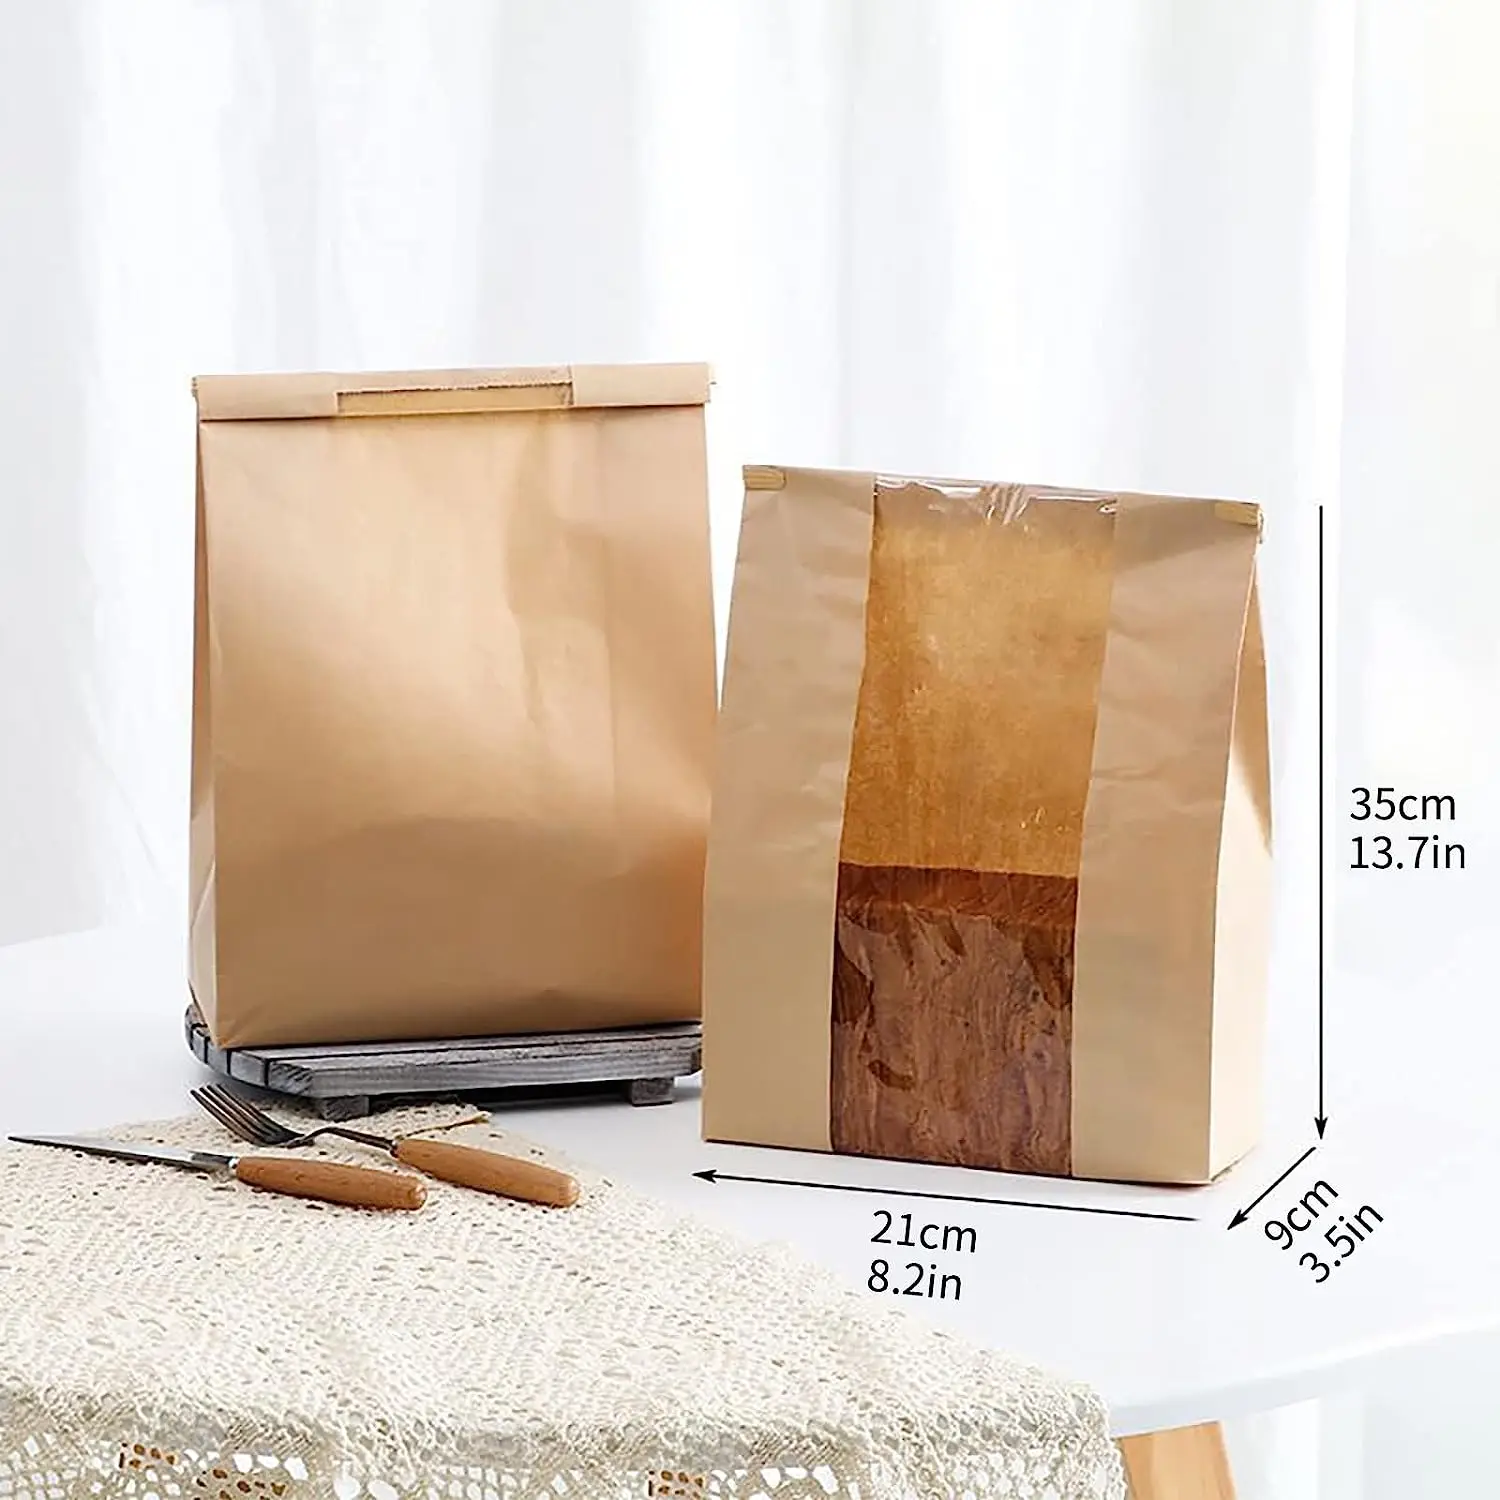 

50pcs Bread Bags for Homemade Bread Large Paper Bakery Bag with Window for Baked Food Packaging Storage Bread Storage Bags